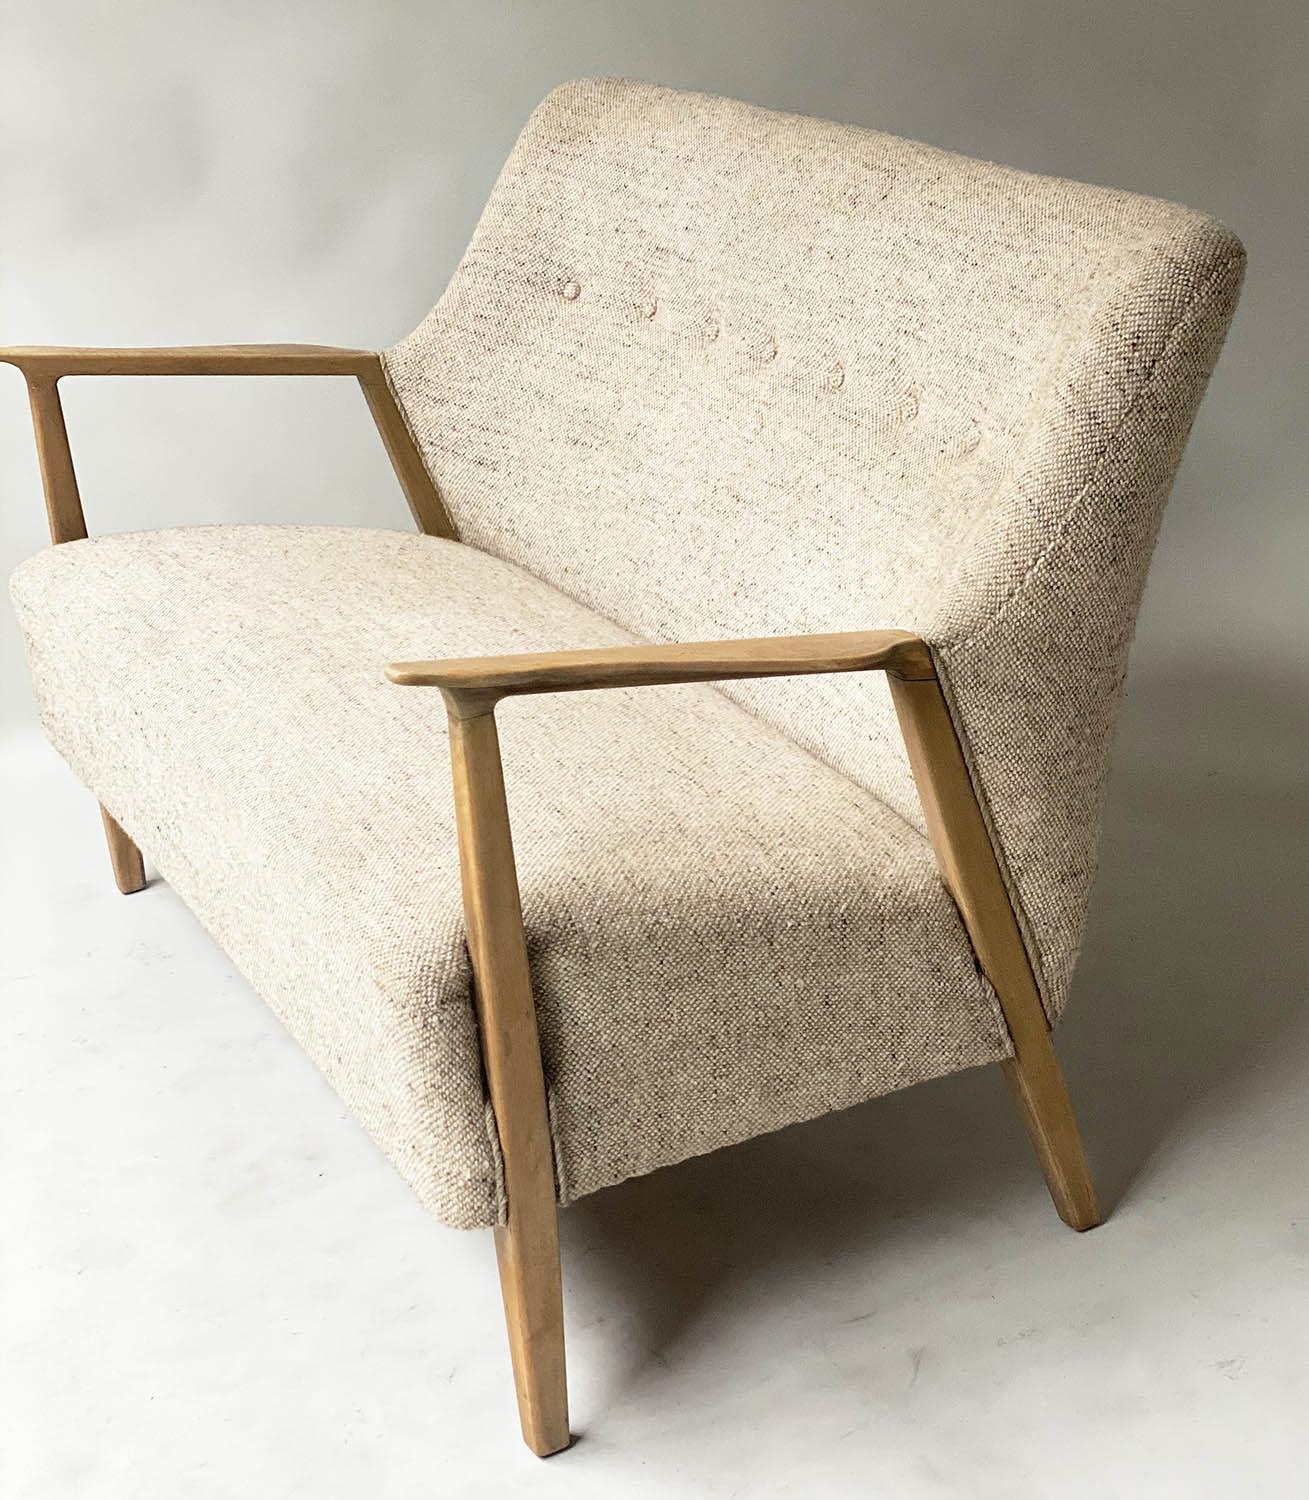 SOFA, 1970's Danish style, sycamore frame, with oatmeal upholstered button back and well shaped rear - Image 5 of 5